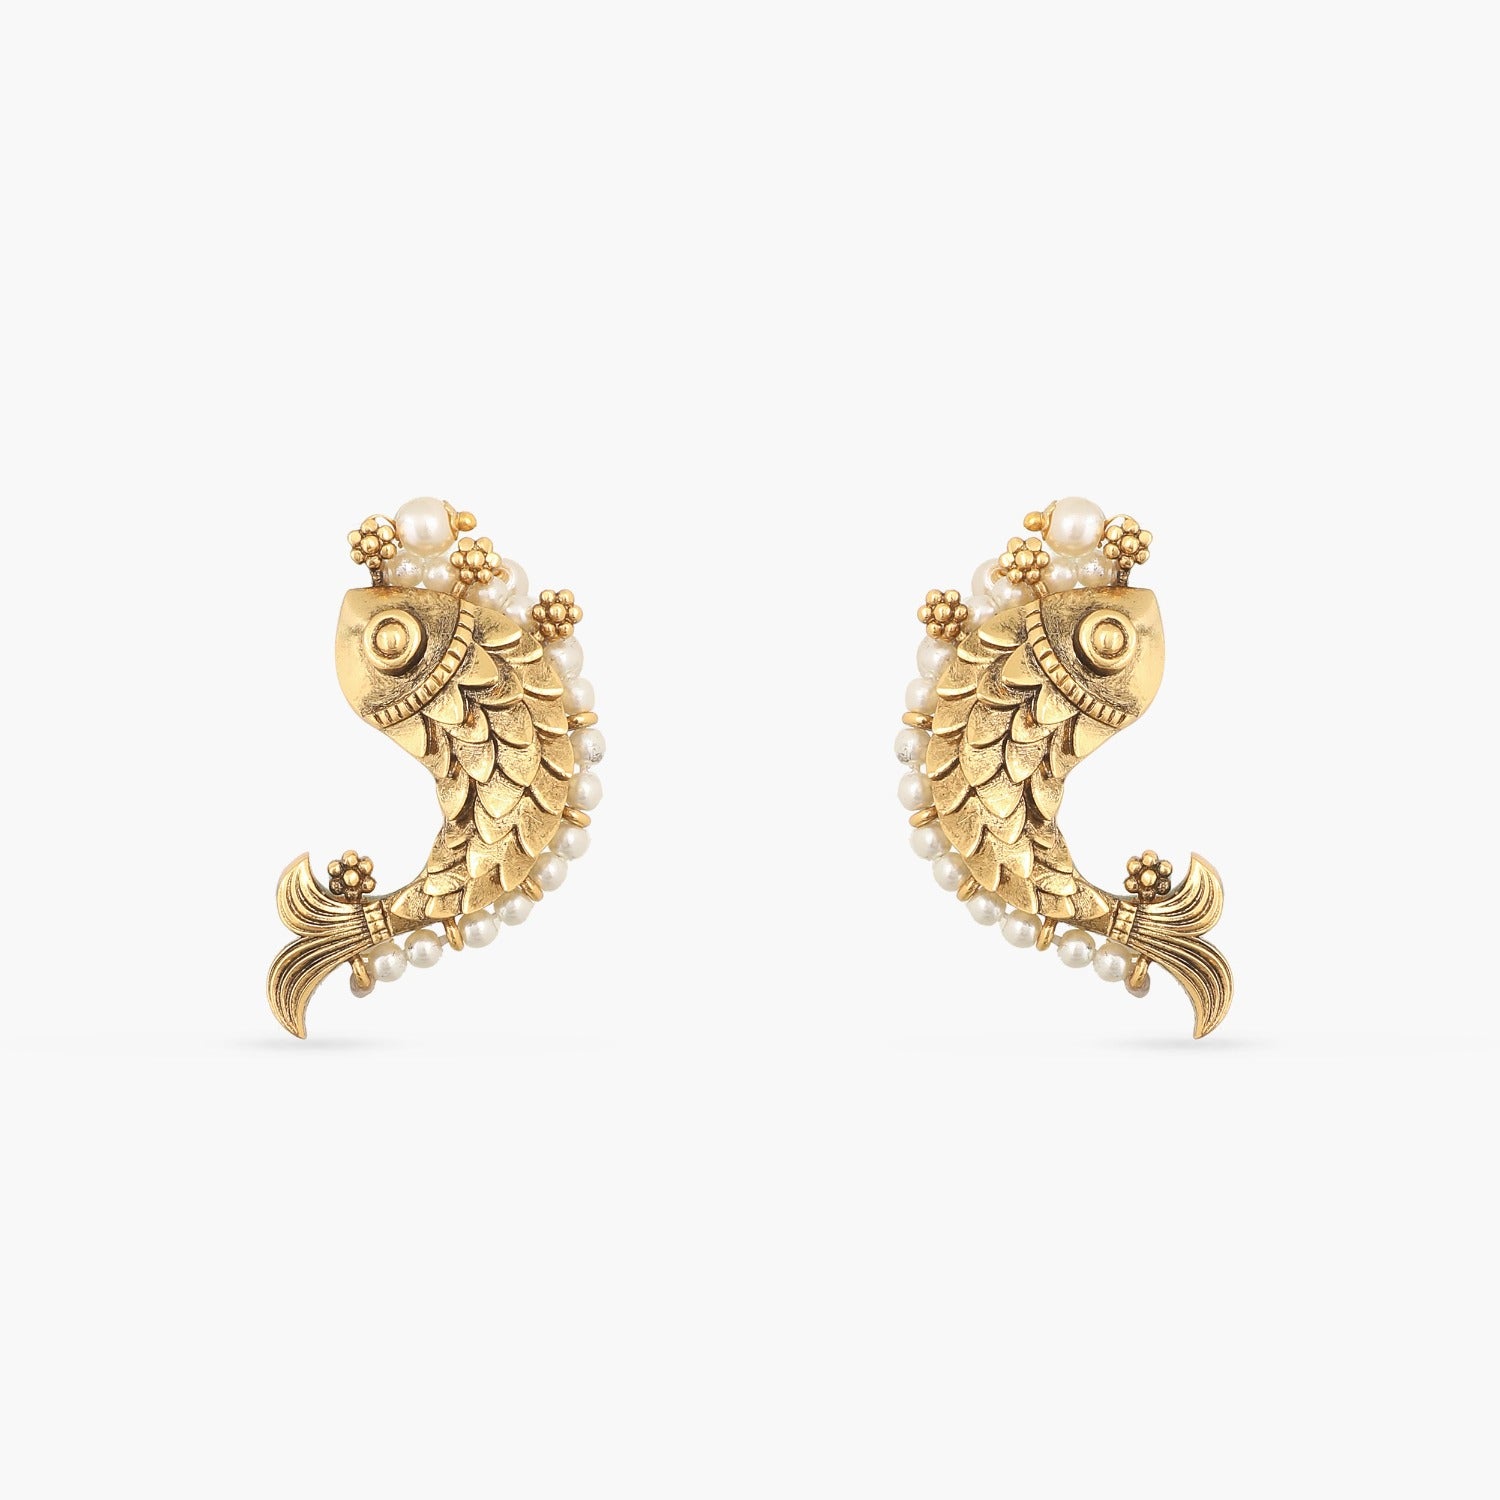 Aggregate more than 231 fish design gold earrings